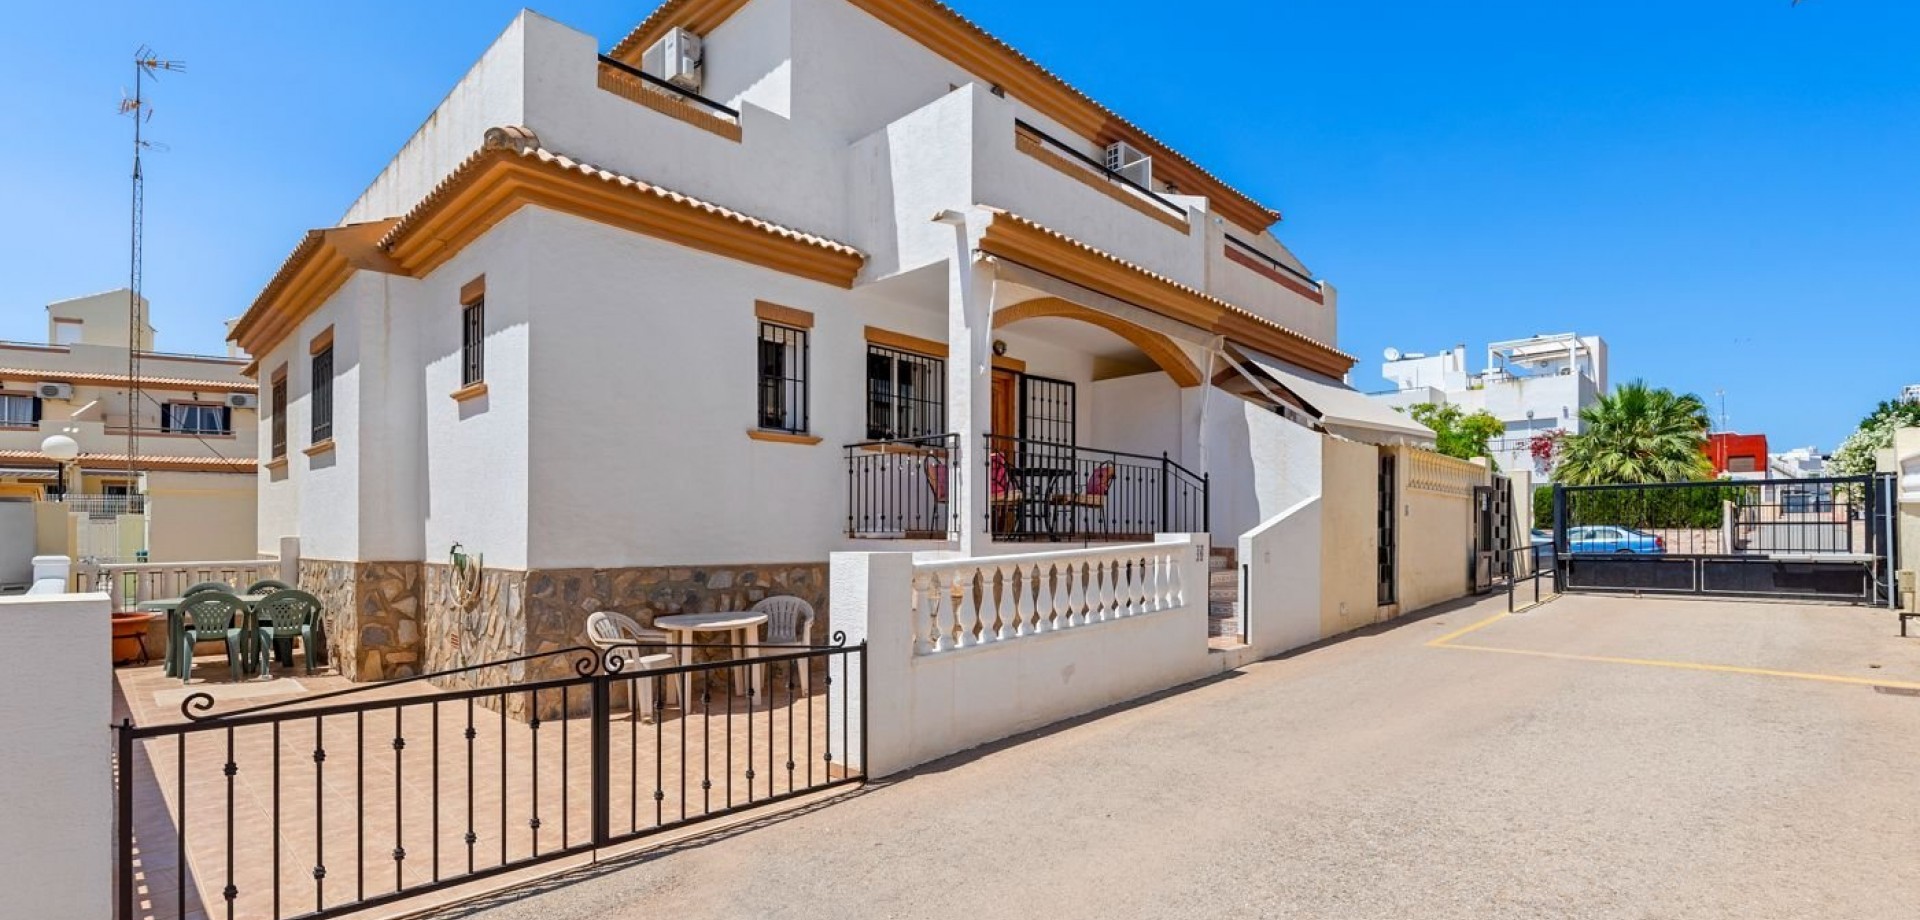 Property Image 614392-torrevieja-townhouses-2-2